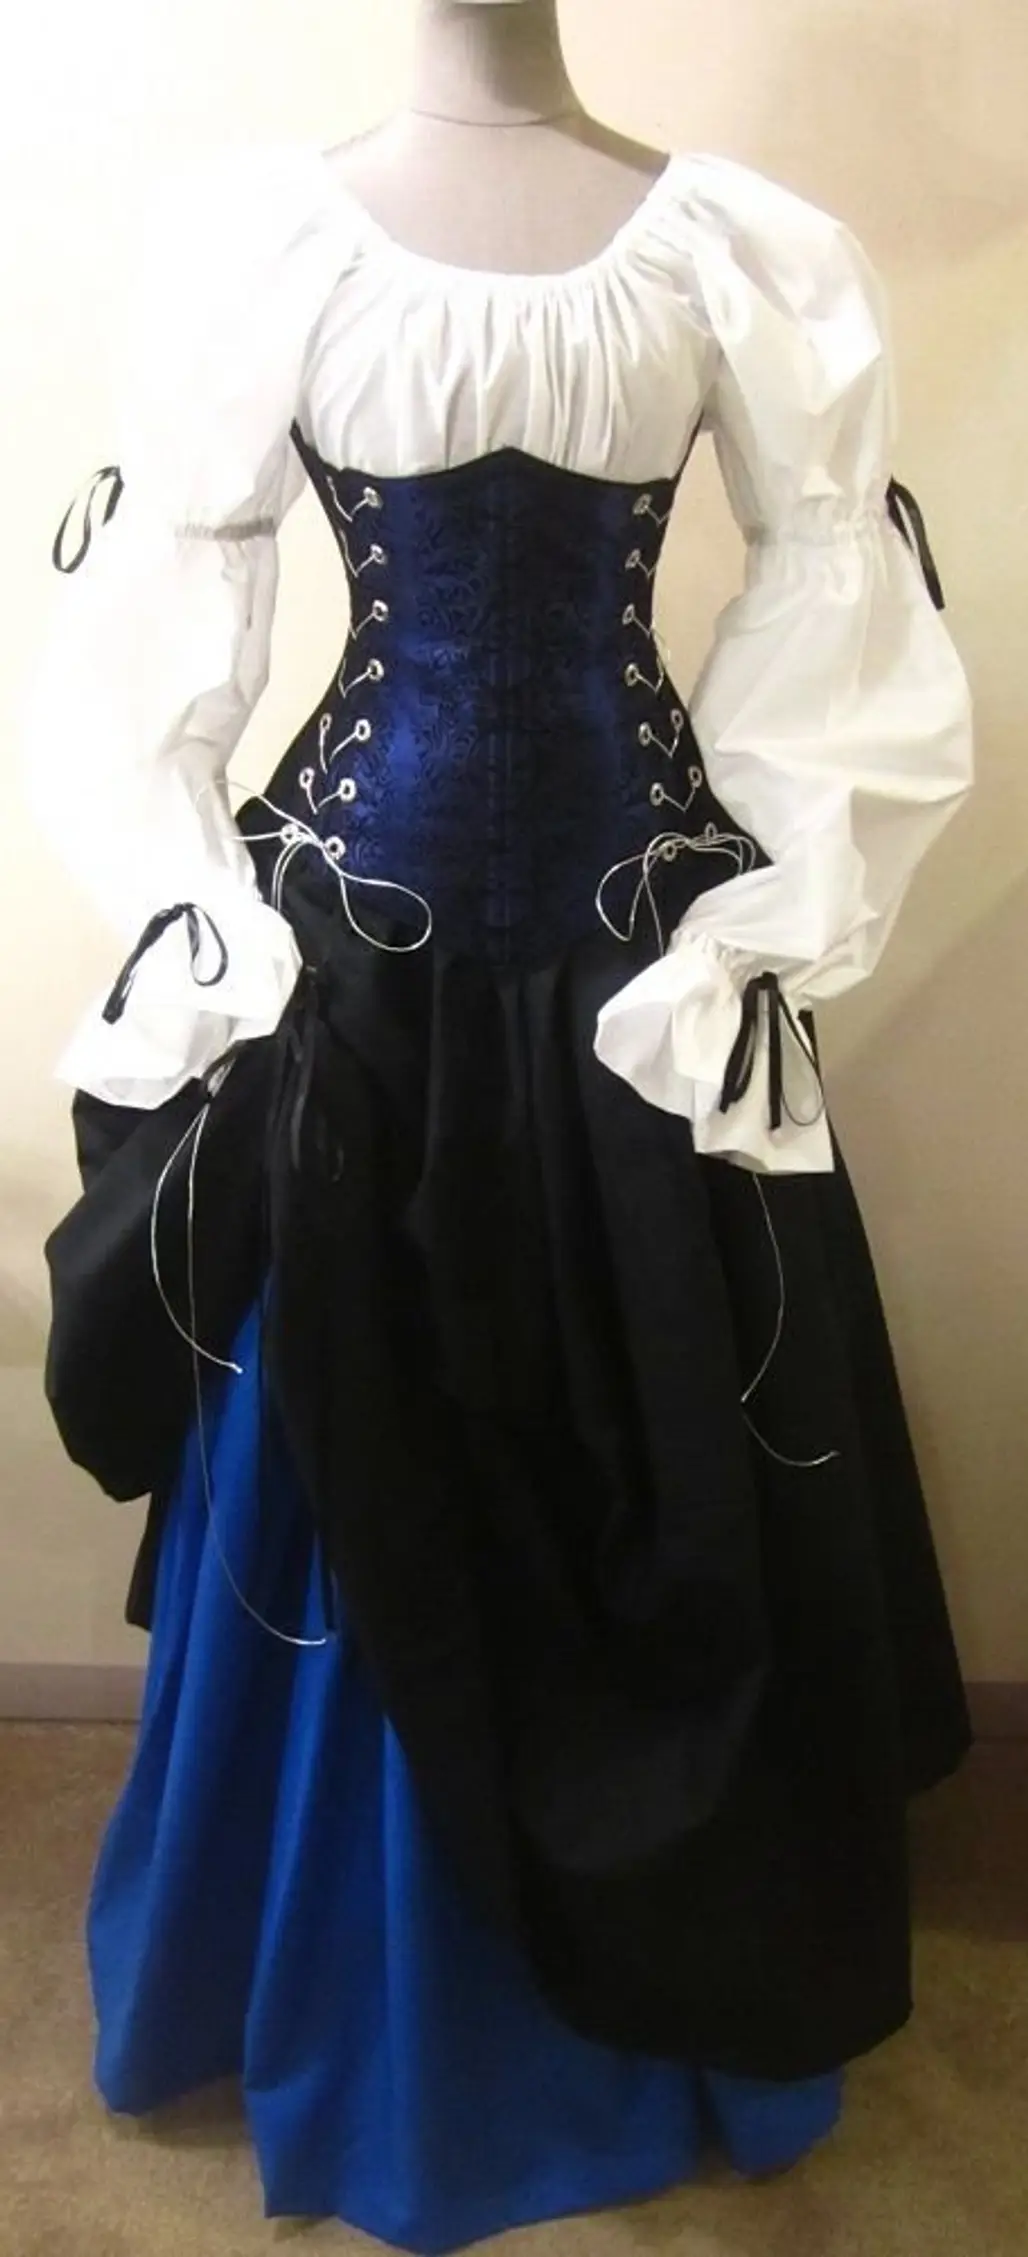 clothing,dress,costume,gown,fashion,